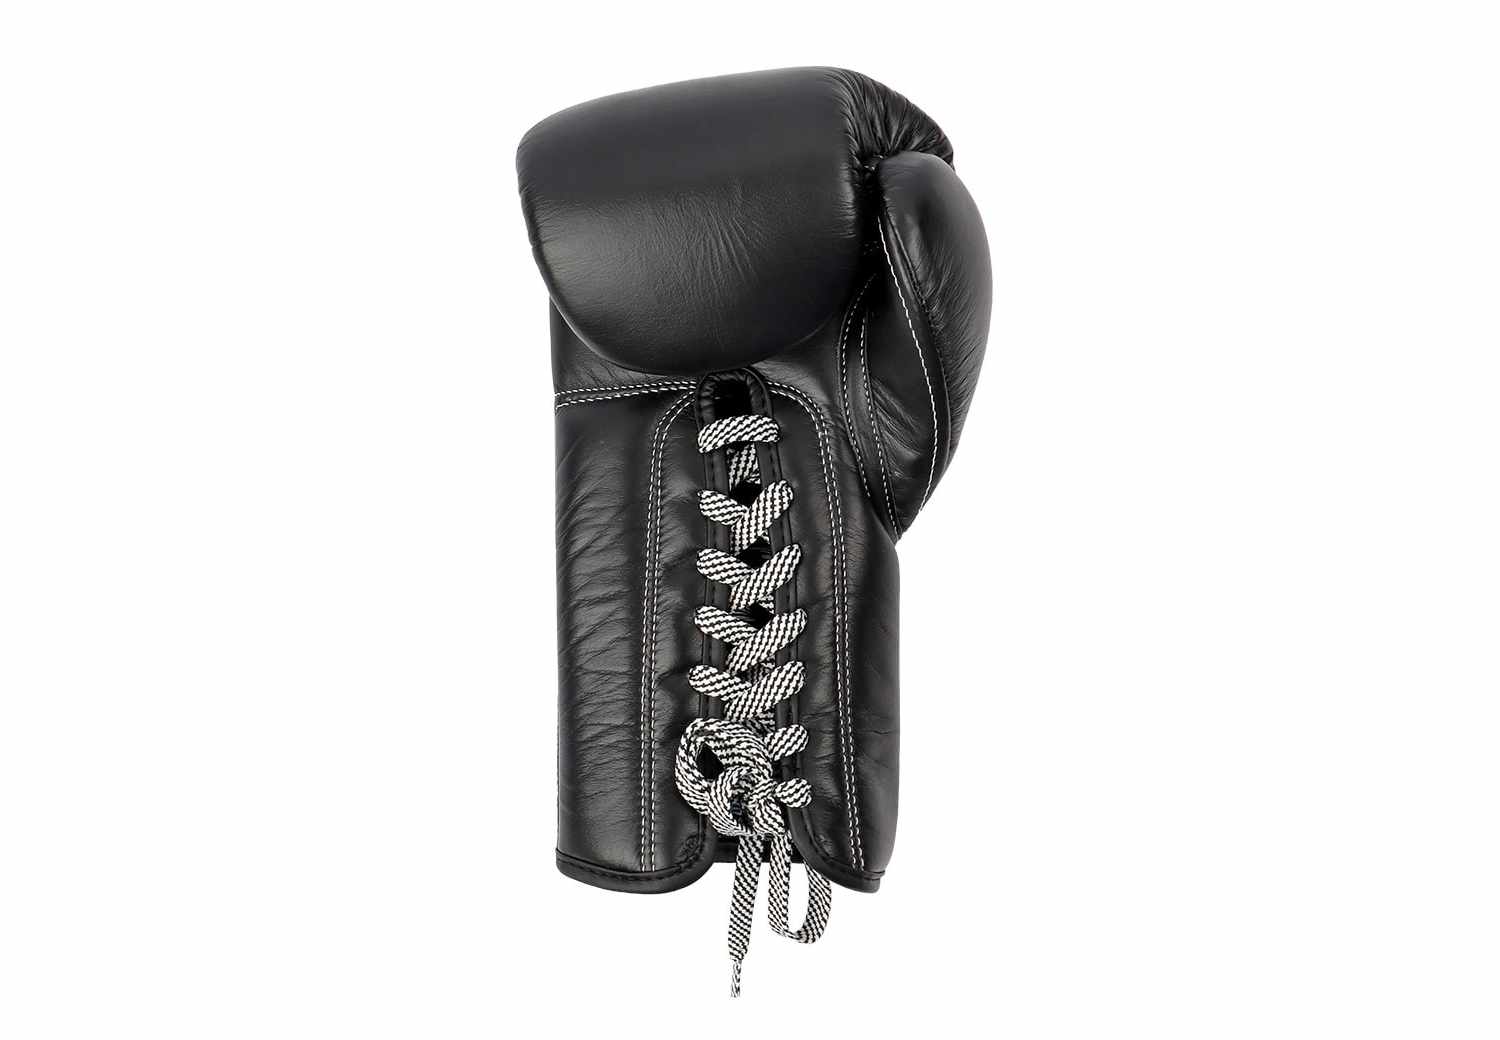 ZEBRA PRO Signature Lace Up Fight Gloves rear view